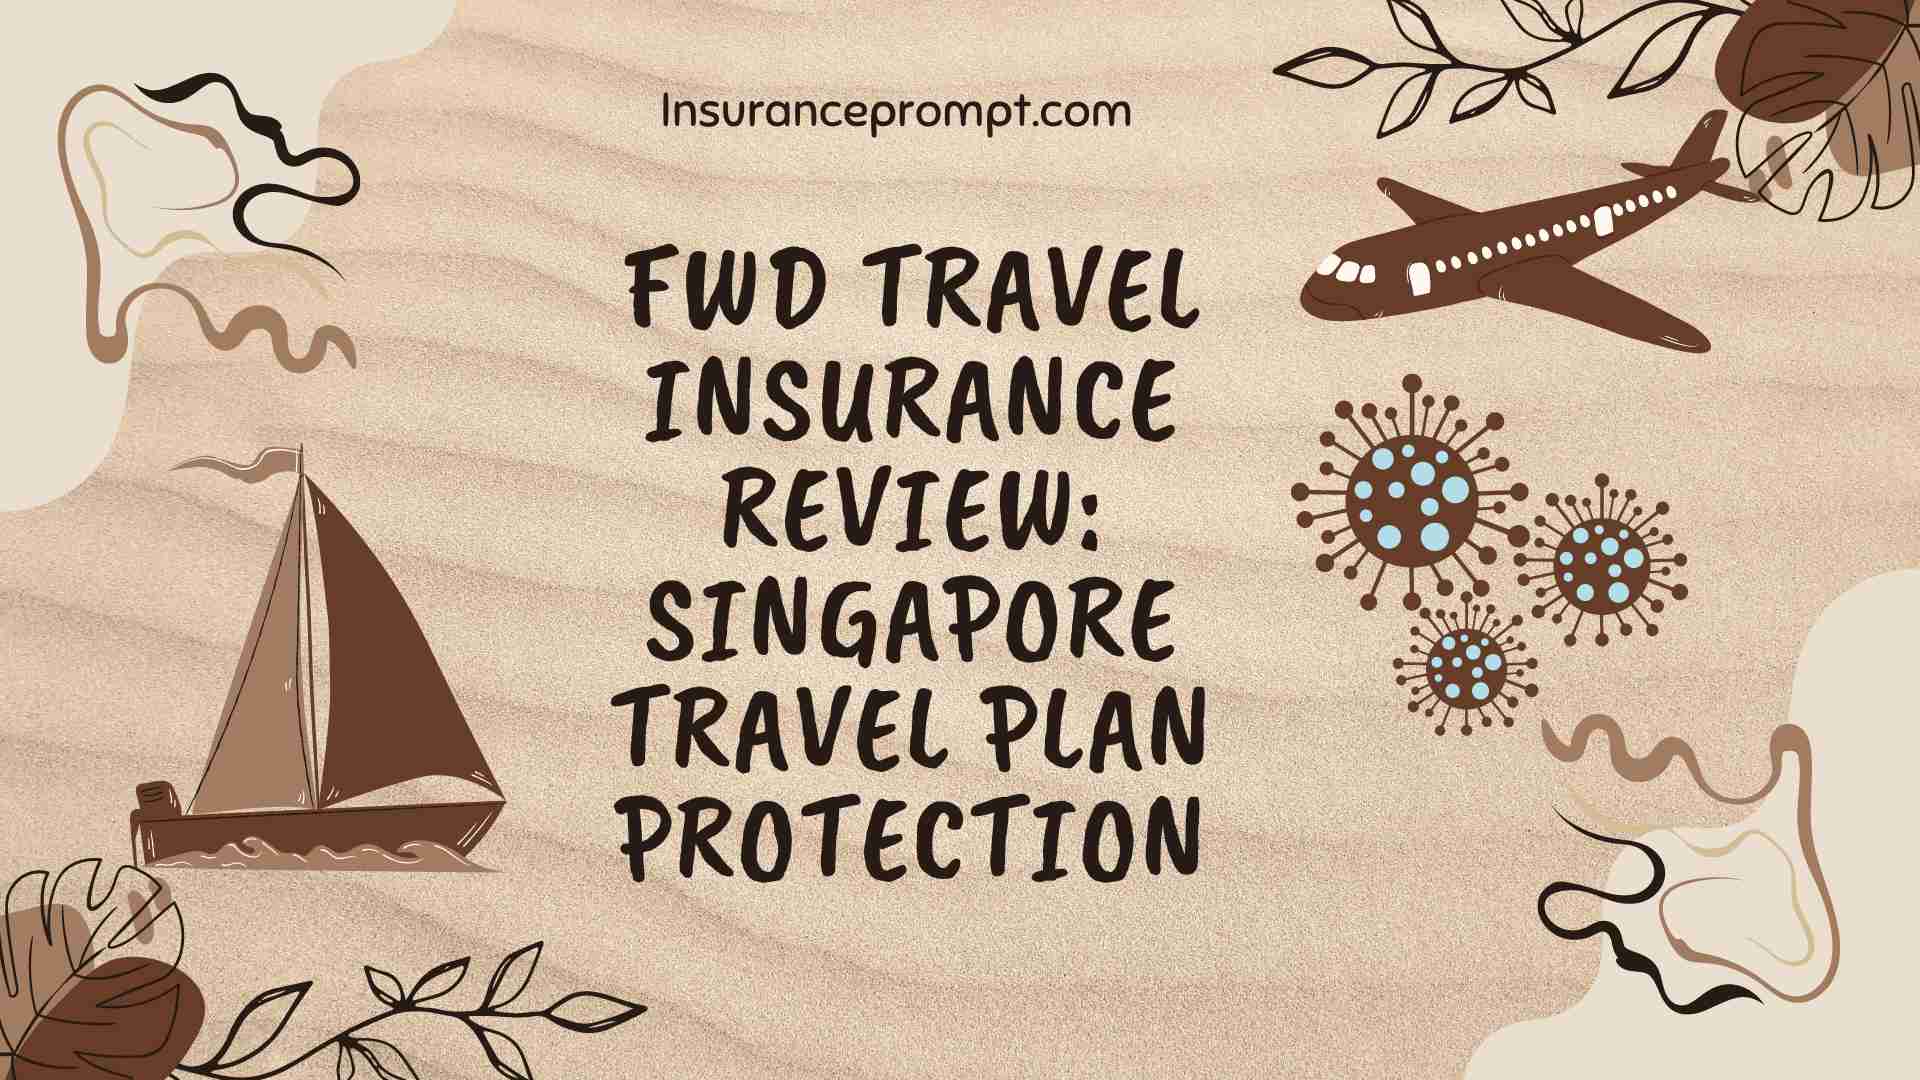 FWD Travel Insurance Review: Singapore Travel Plan Protection